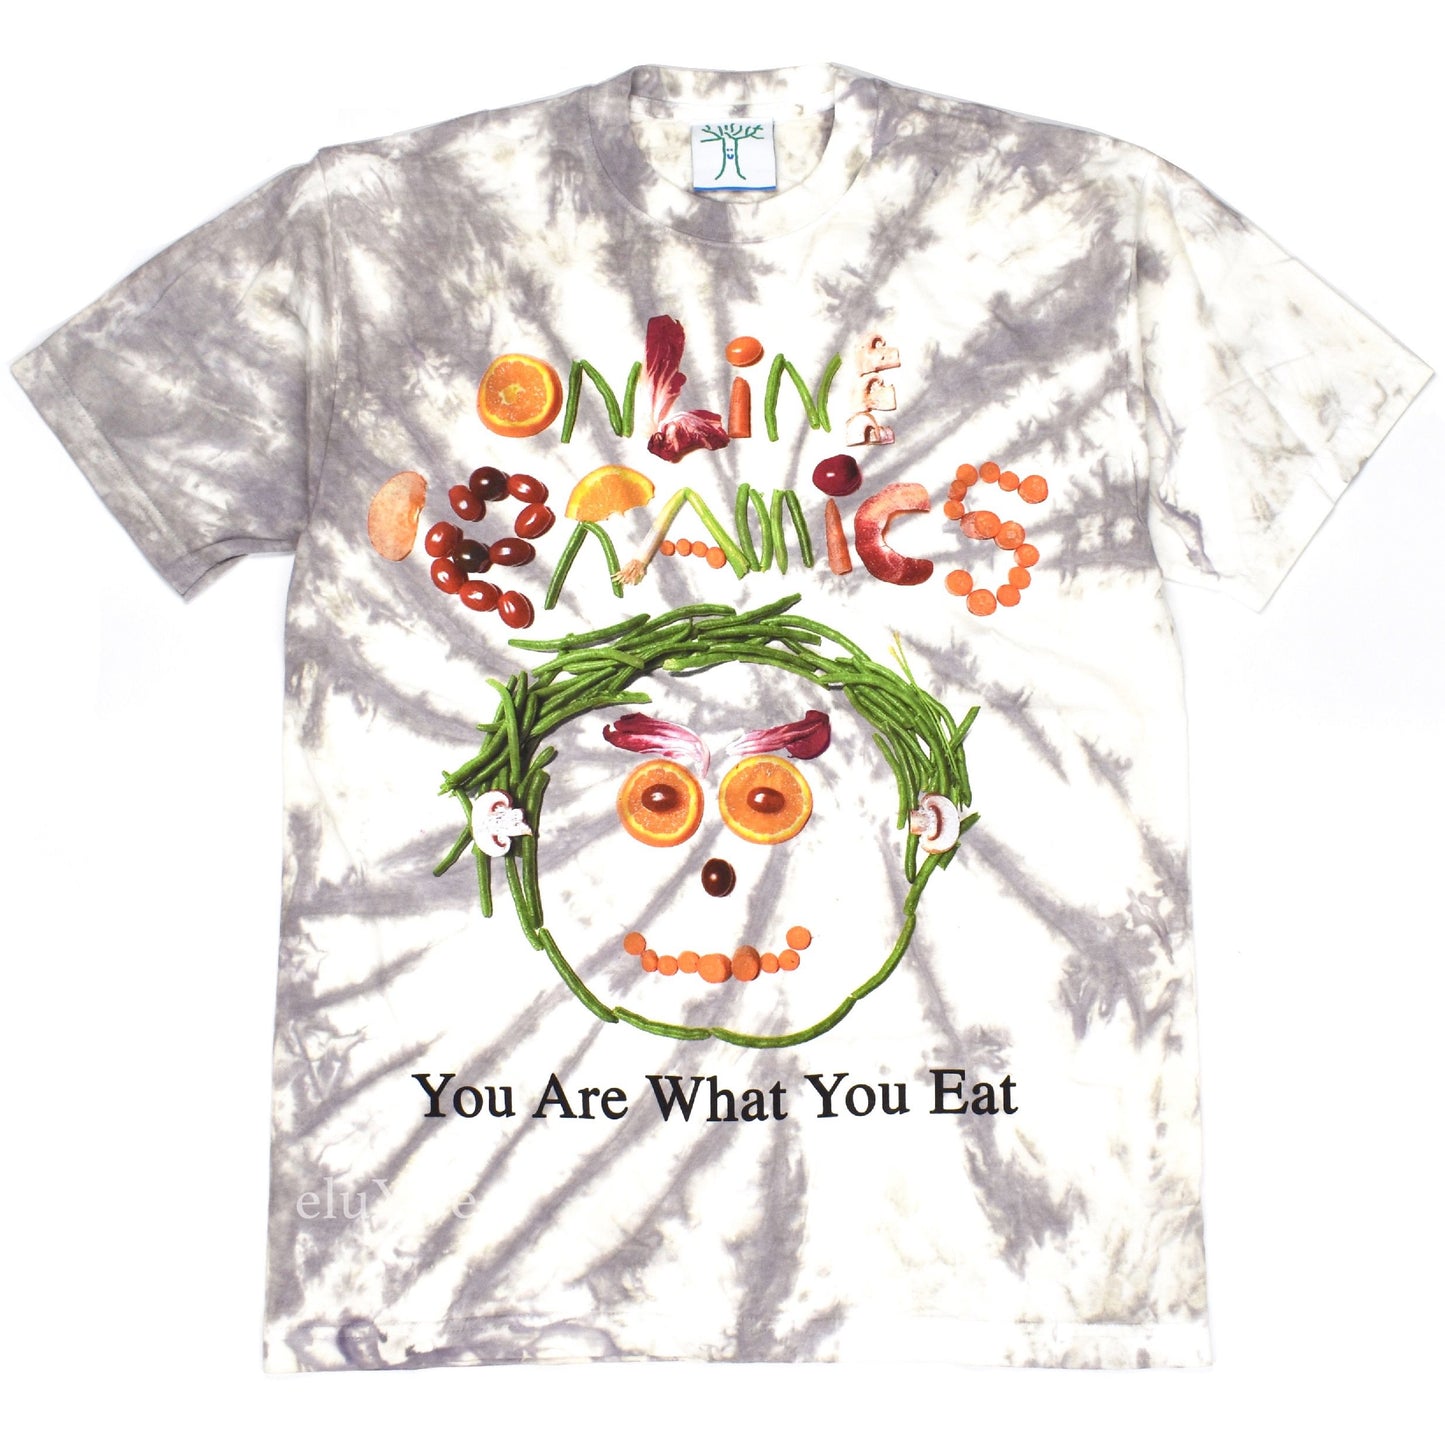 Online Ceramics - You Are What You Eat Tie-Dye T-Shirt